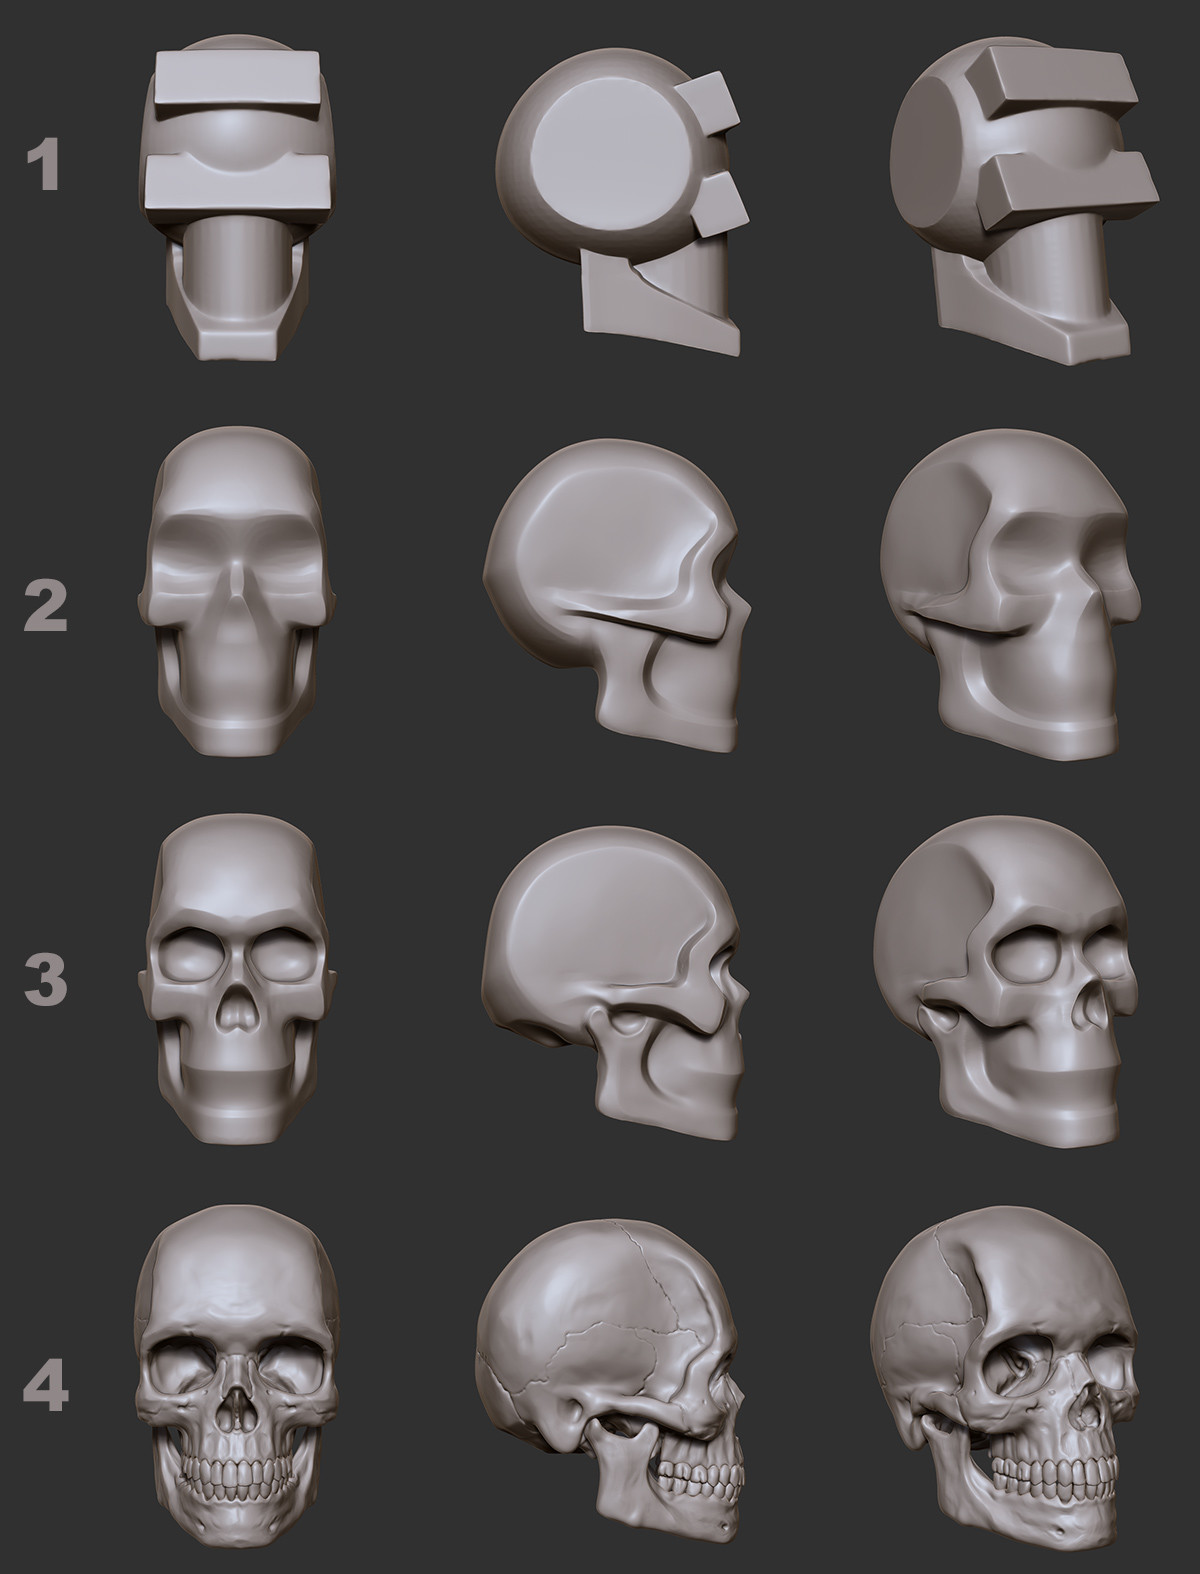 This is the process I used for sculpting the skull.  I learned this approach from Kris Costa during an online course.